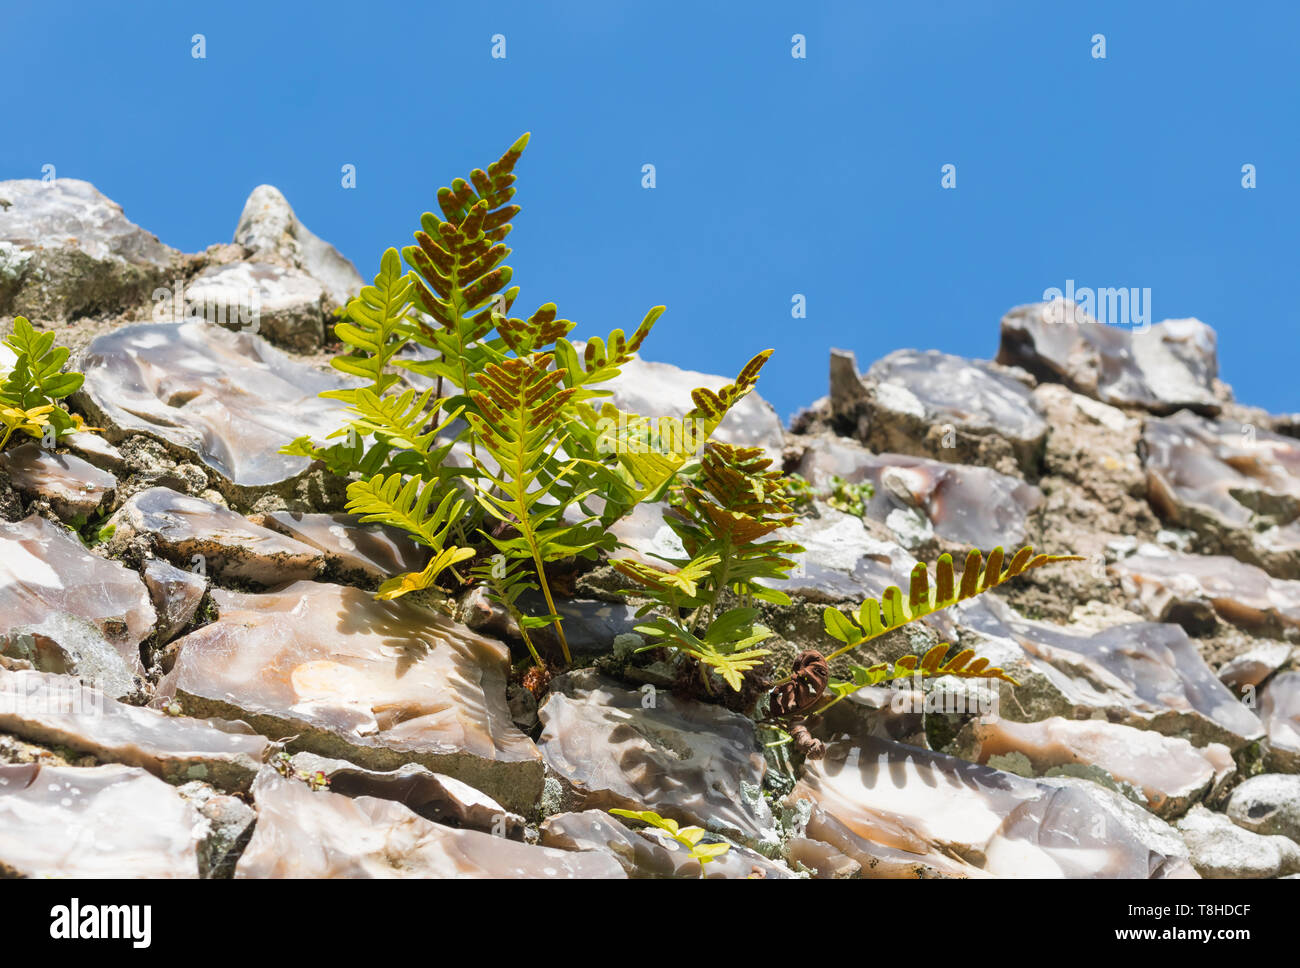 Polypody ferns (Polypodium fern, Polypodies, Rockcap ferns) growing out of an old stone wall in Winter (February) in West Sussex, England, UK. Stock Photo